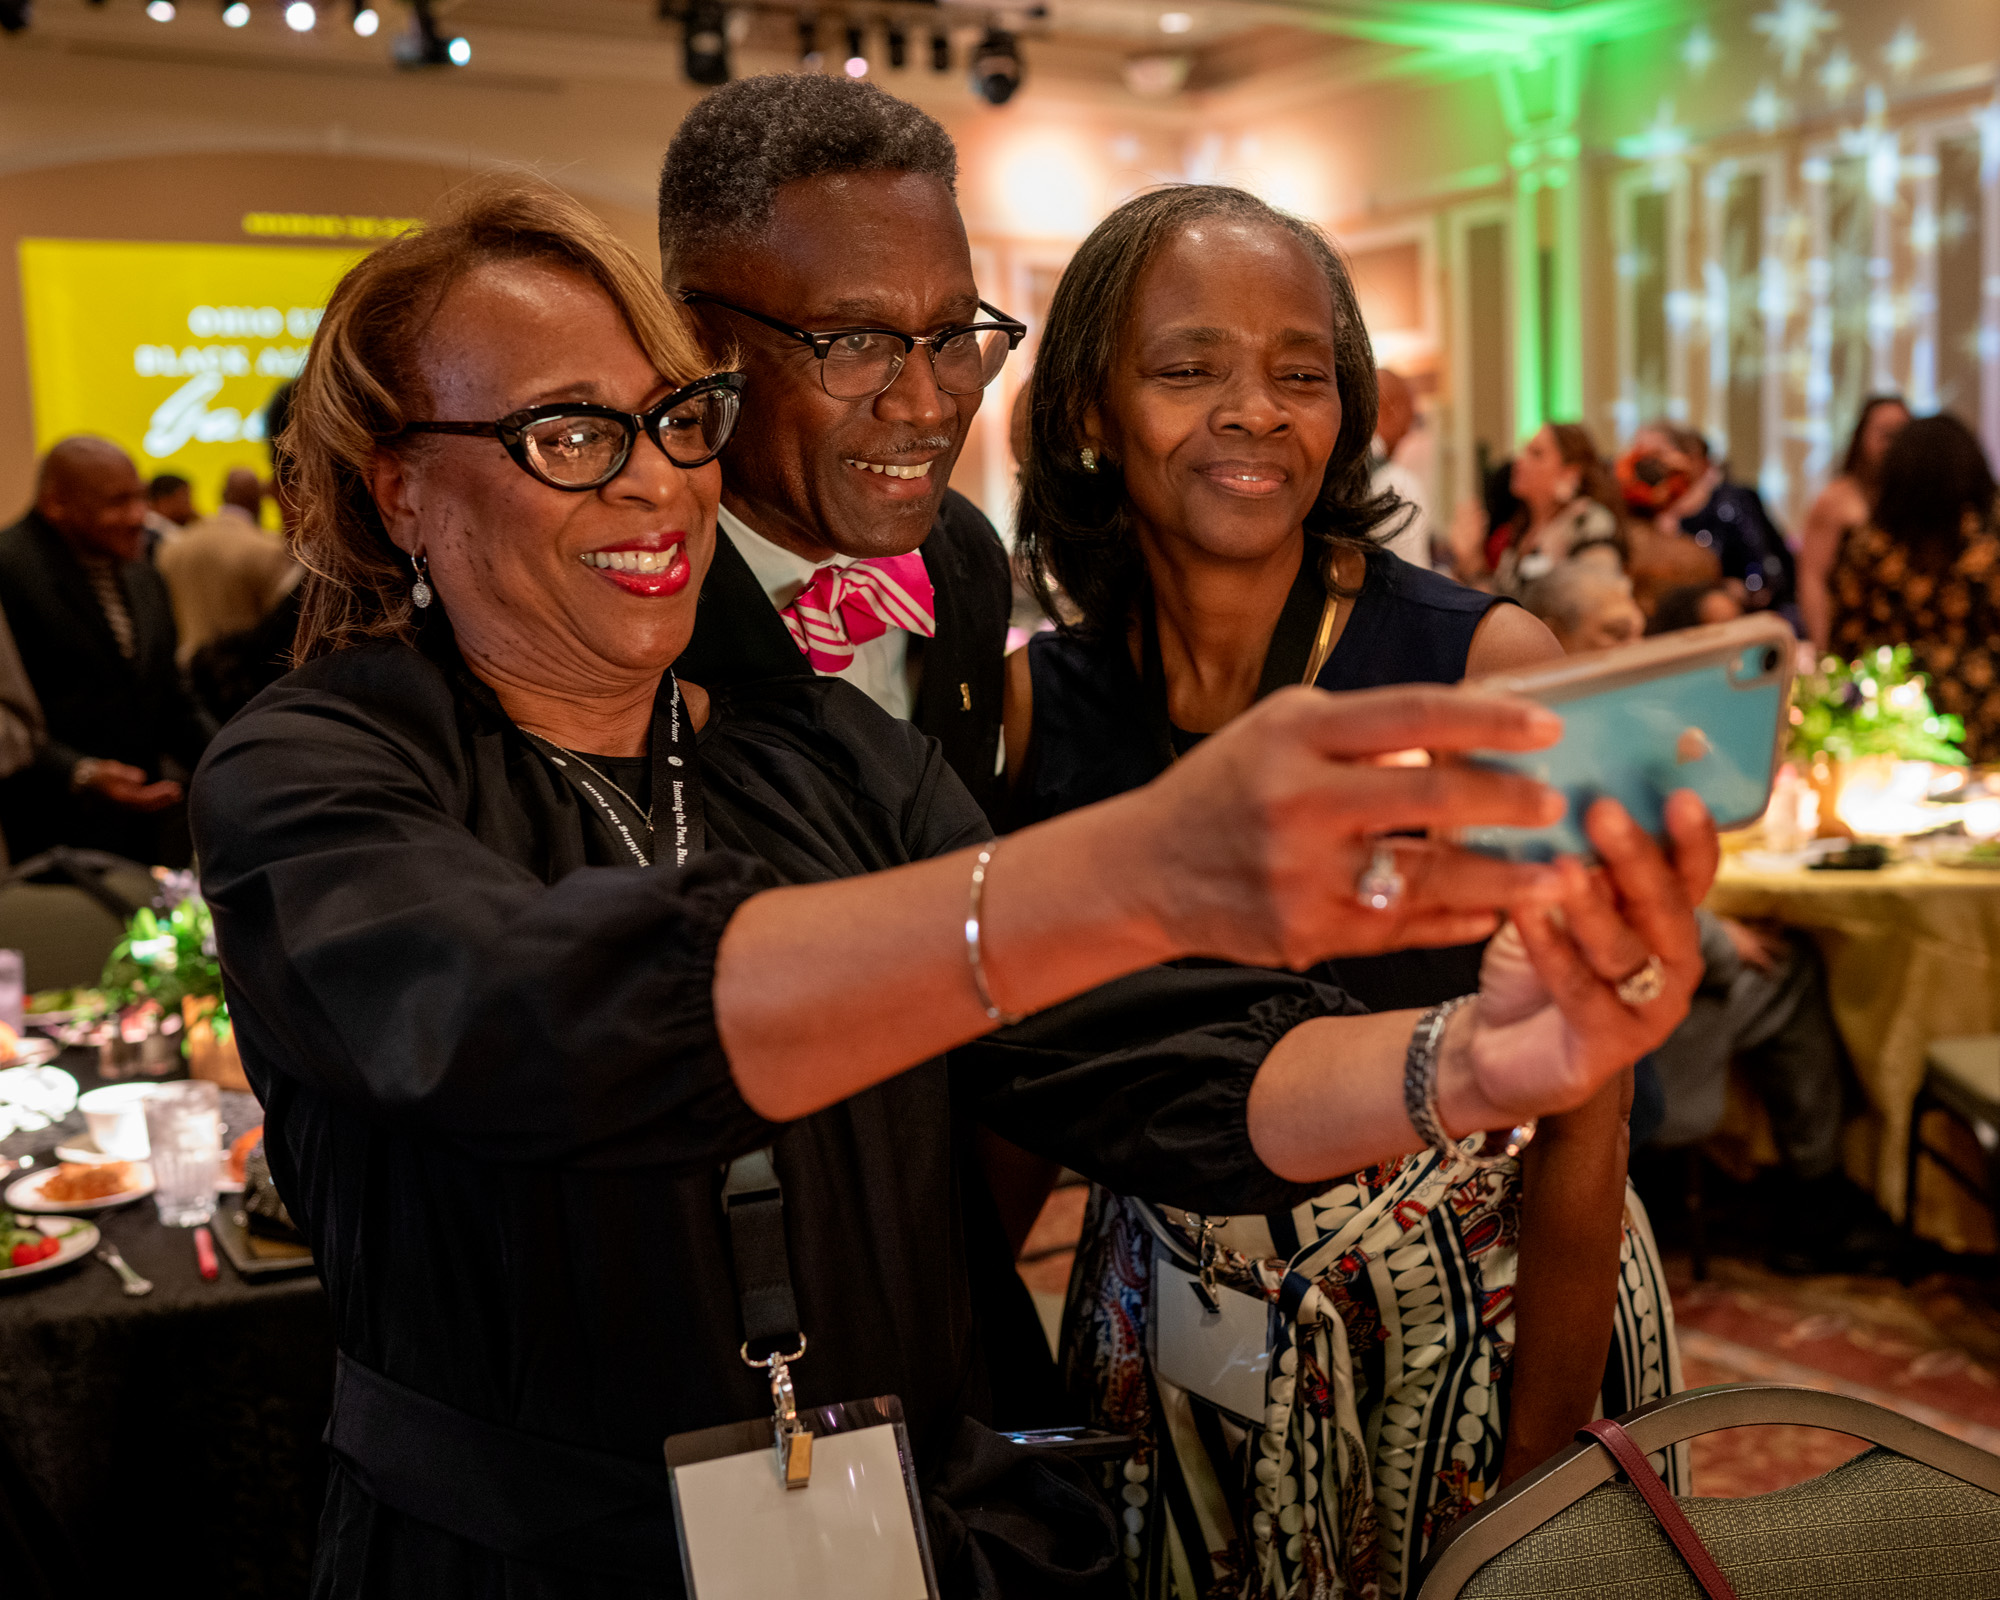 BAR Gala attendees could be seen sharing some photos of their days as OHIO students – and taking some new ones.